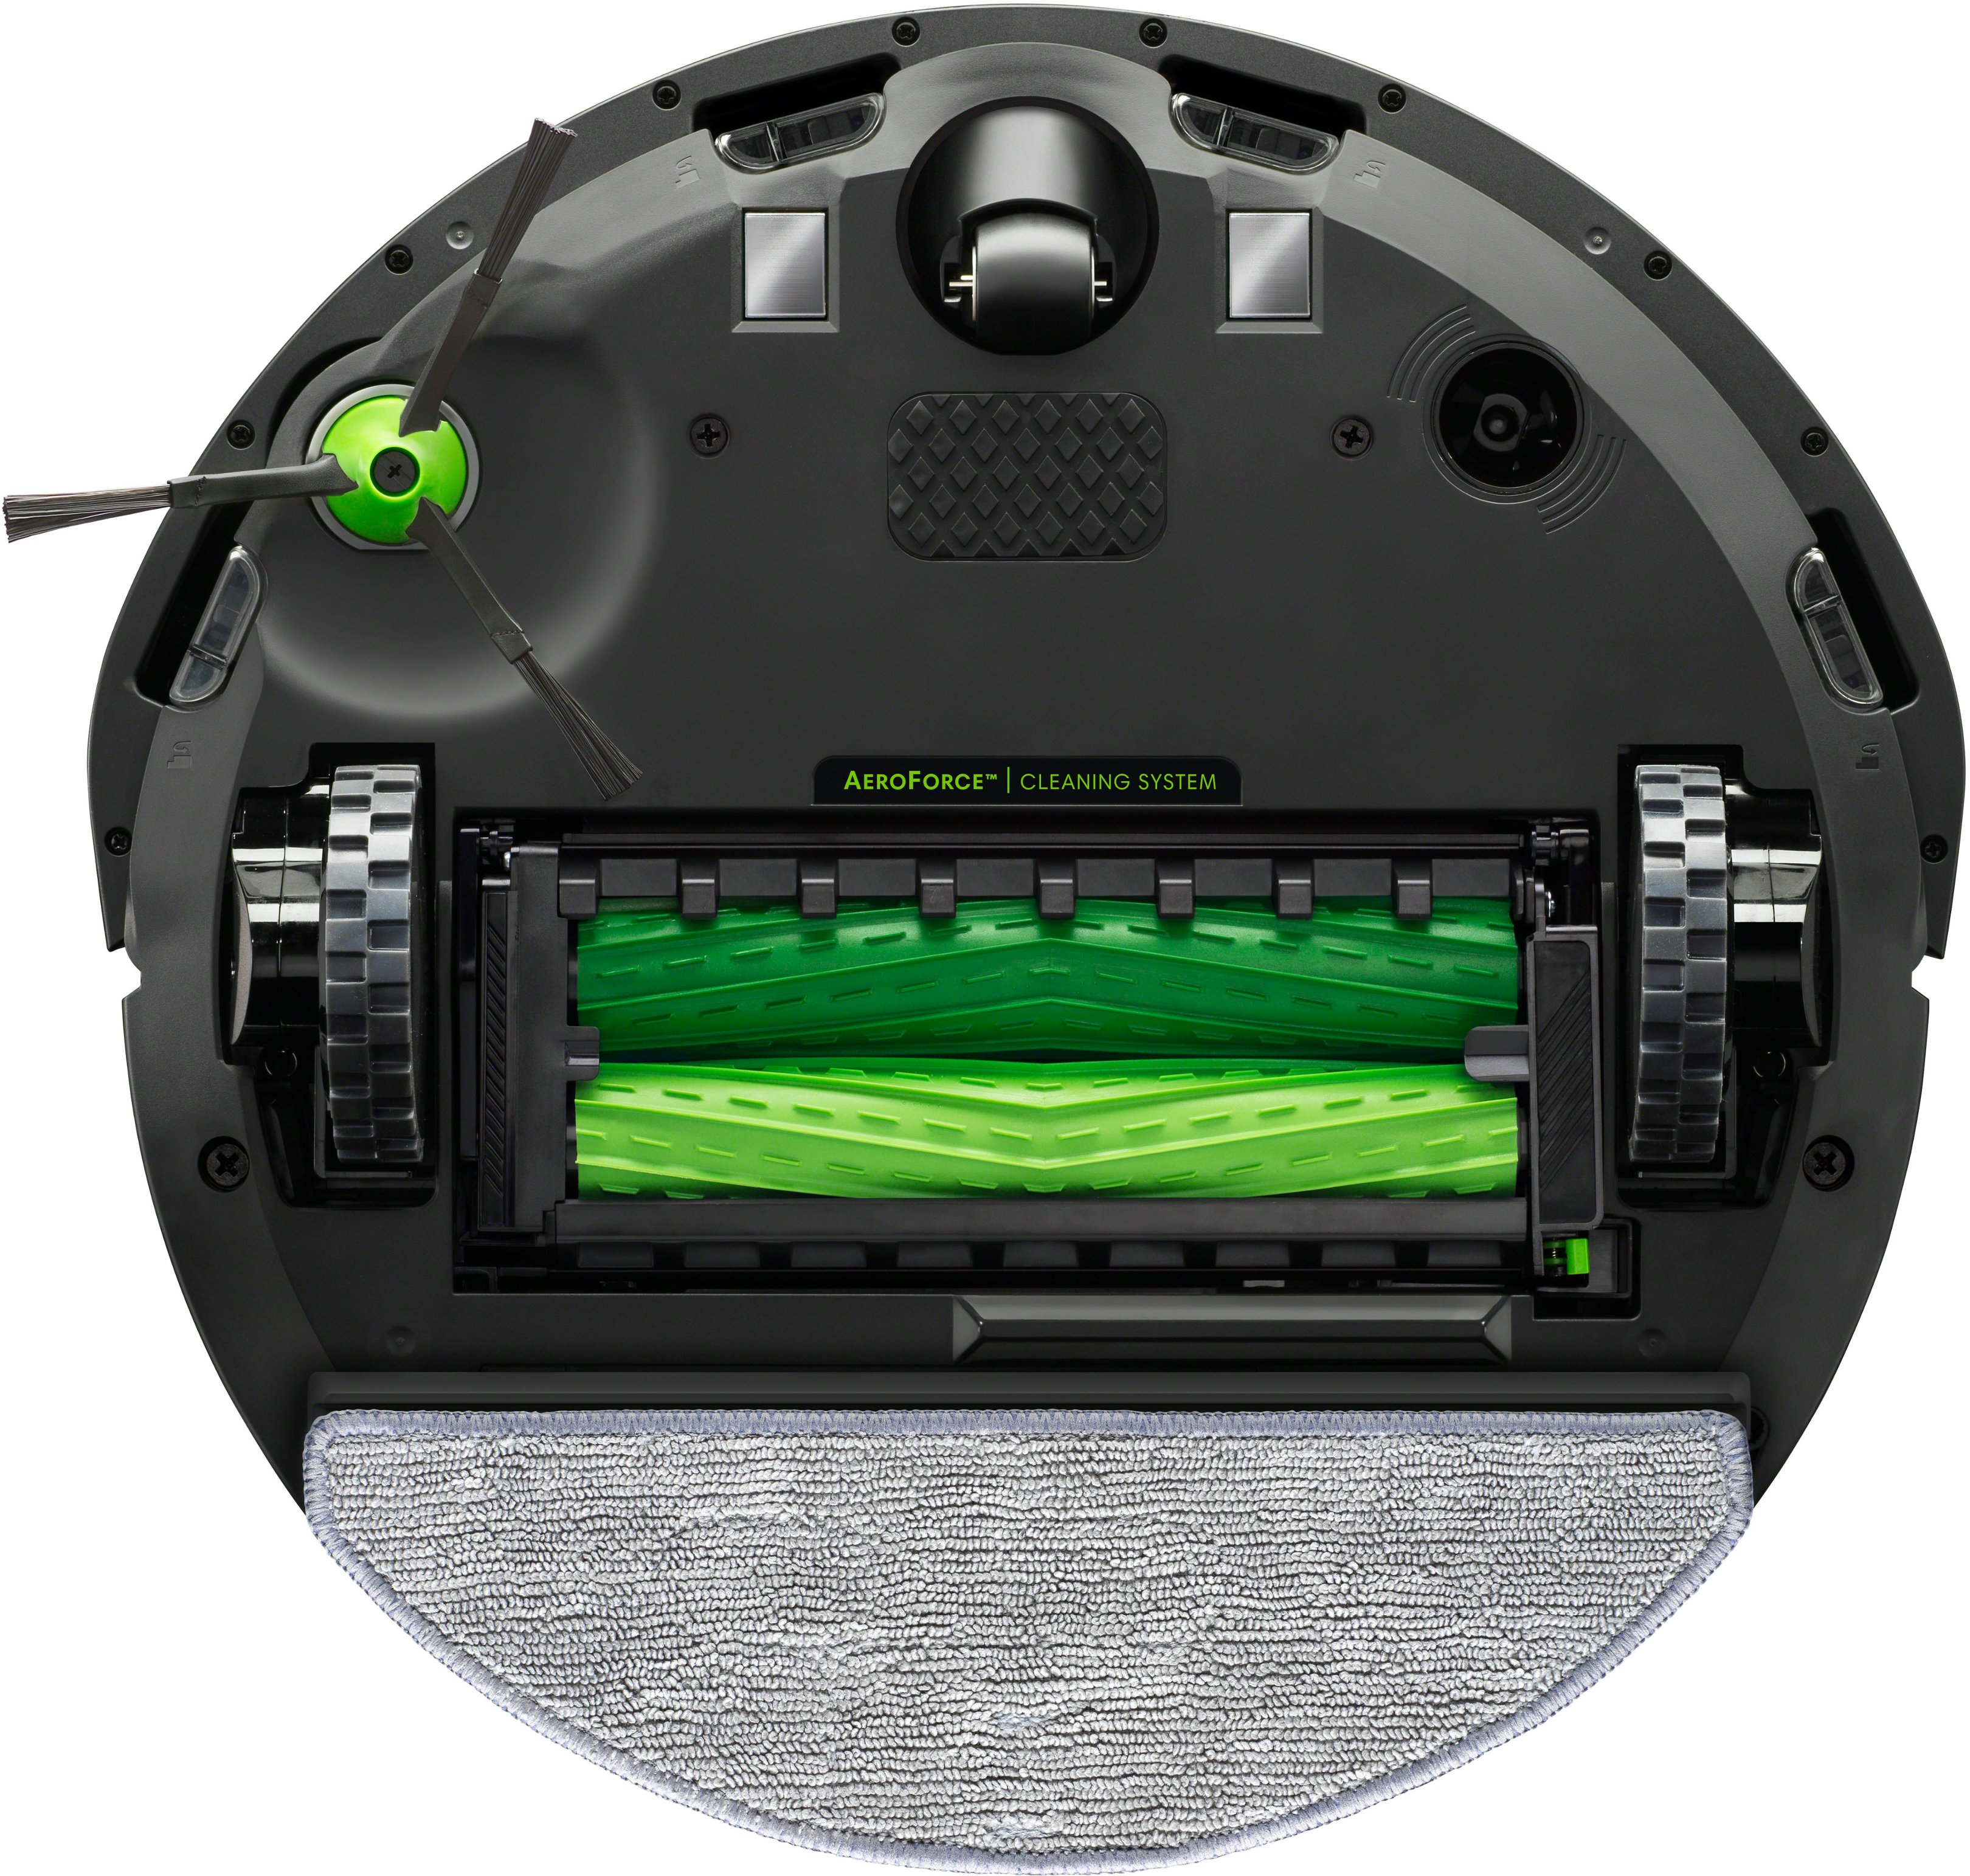 Vacuum? Vacuum & Mop? It's Your Choice with iRobot's Expanded